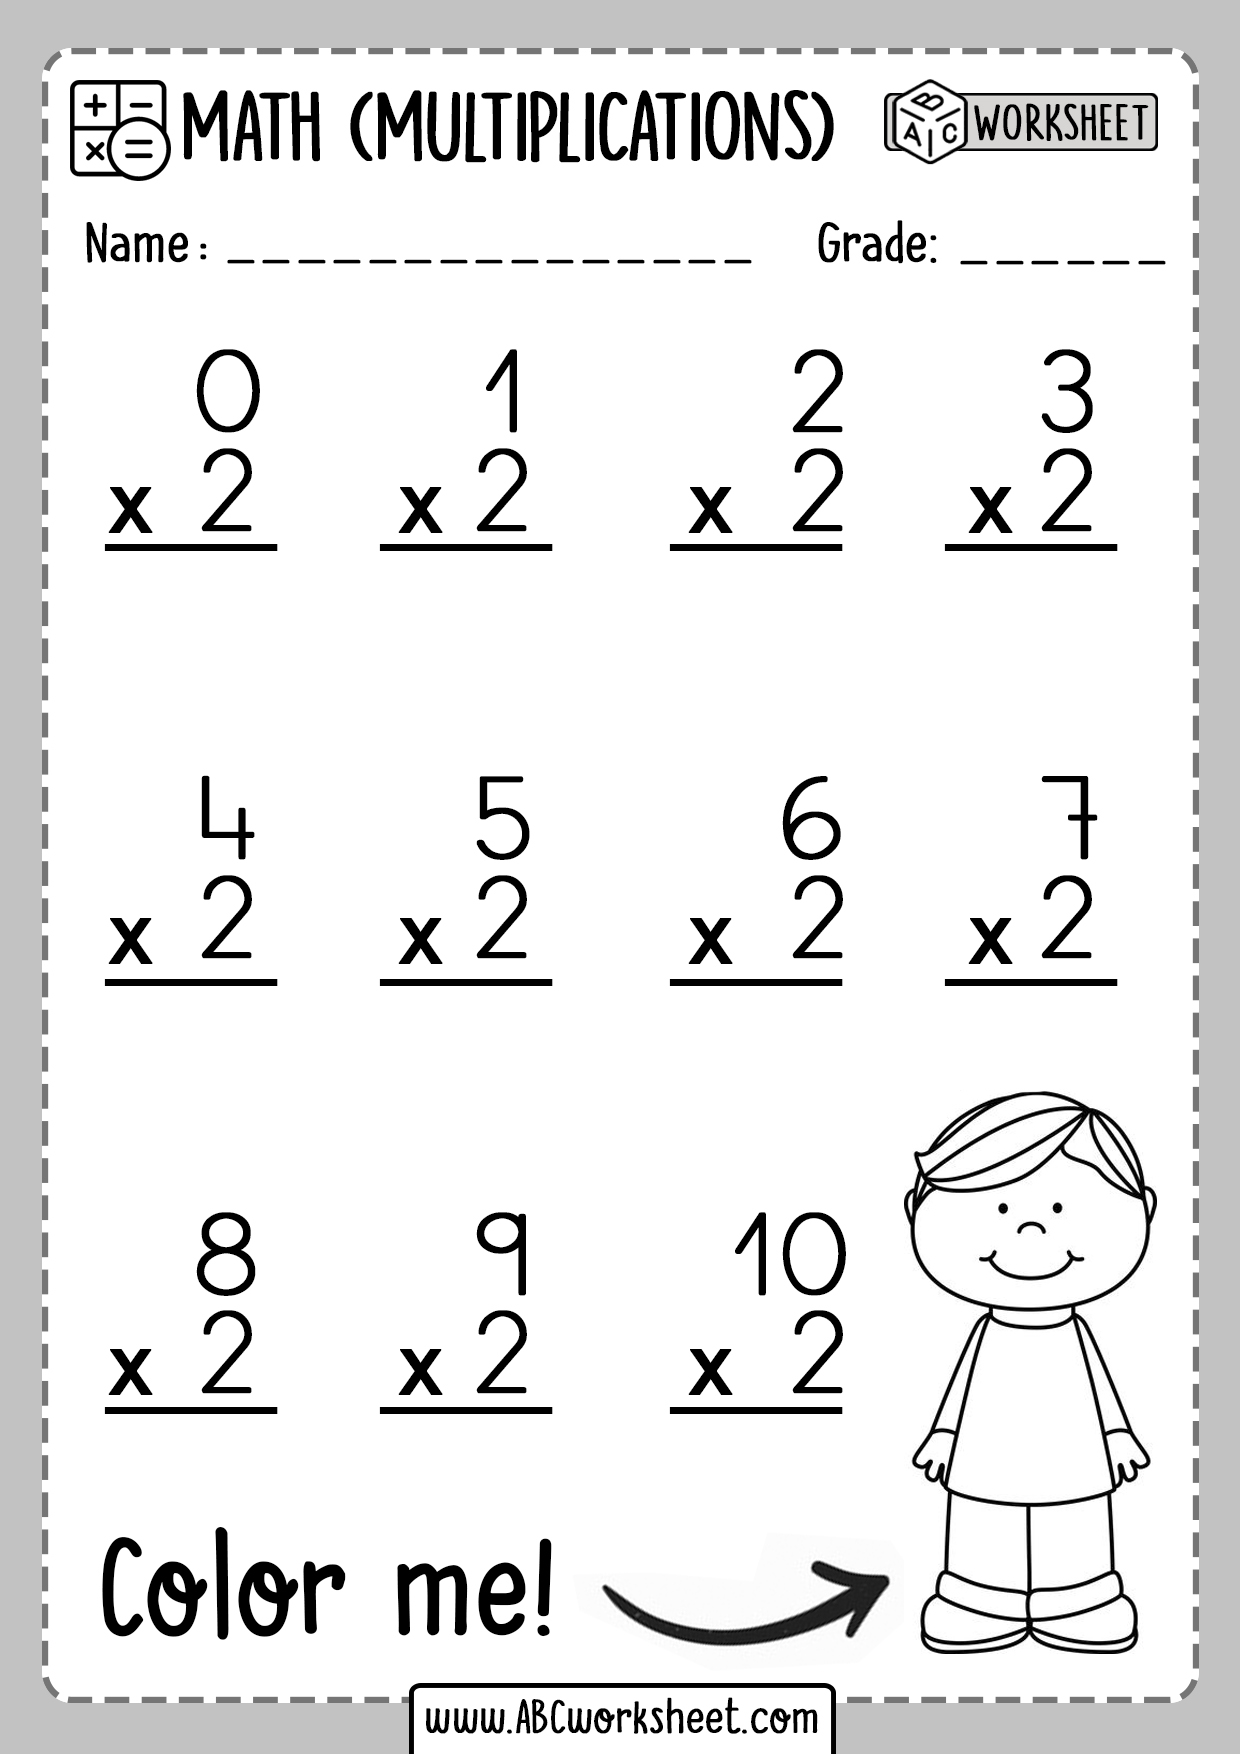 multiplication-worksheets-printable-free-customize-and-print